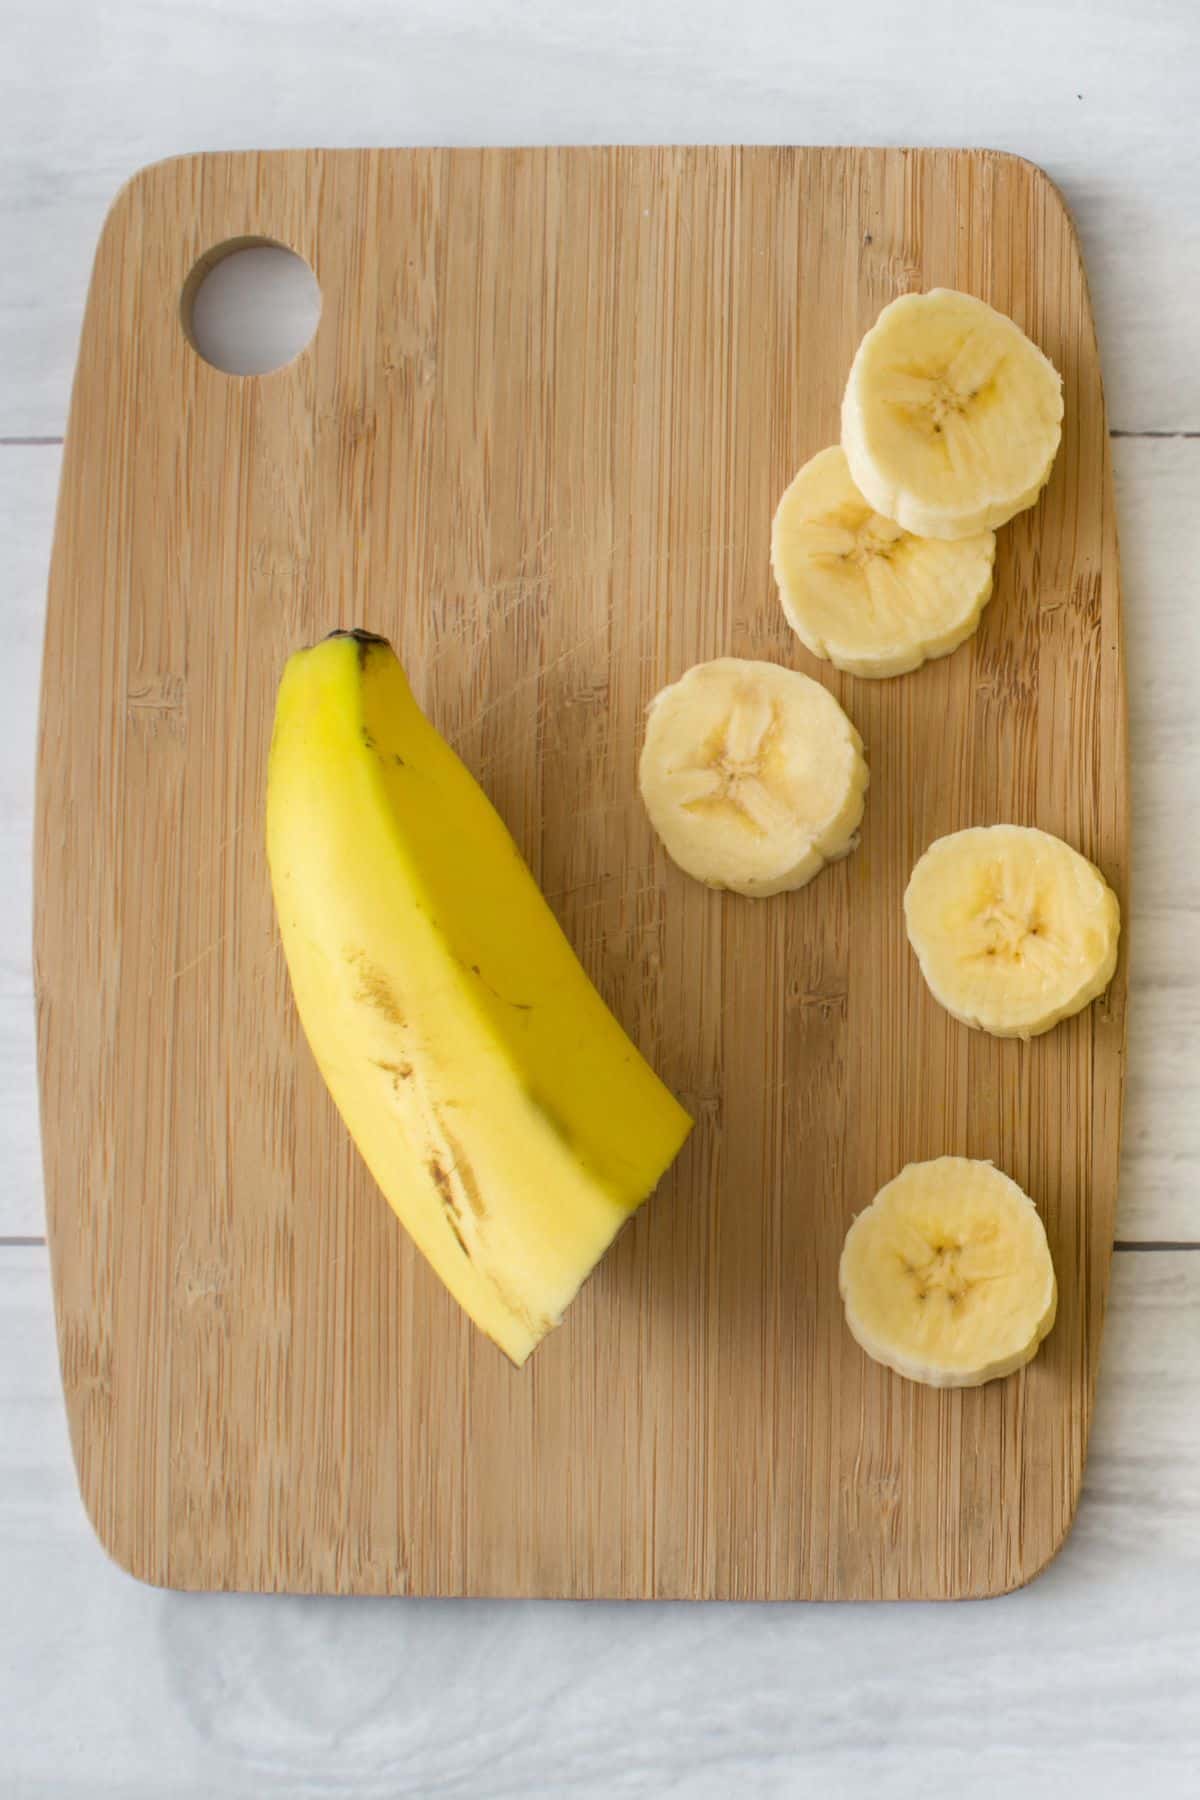 A banana half and slices on a wooden cutting board.